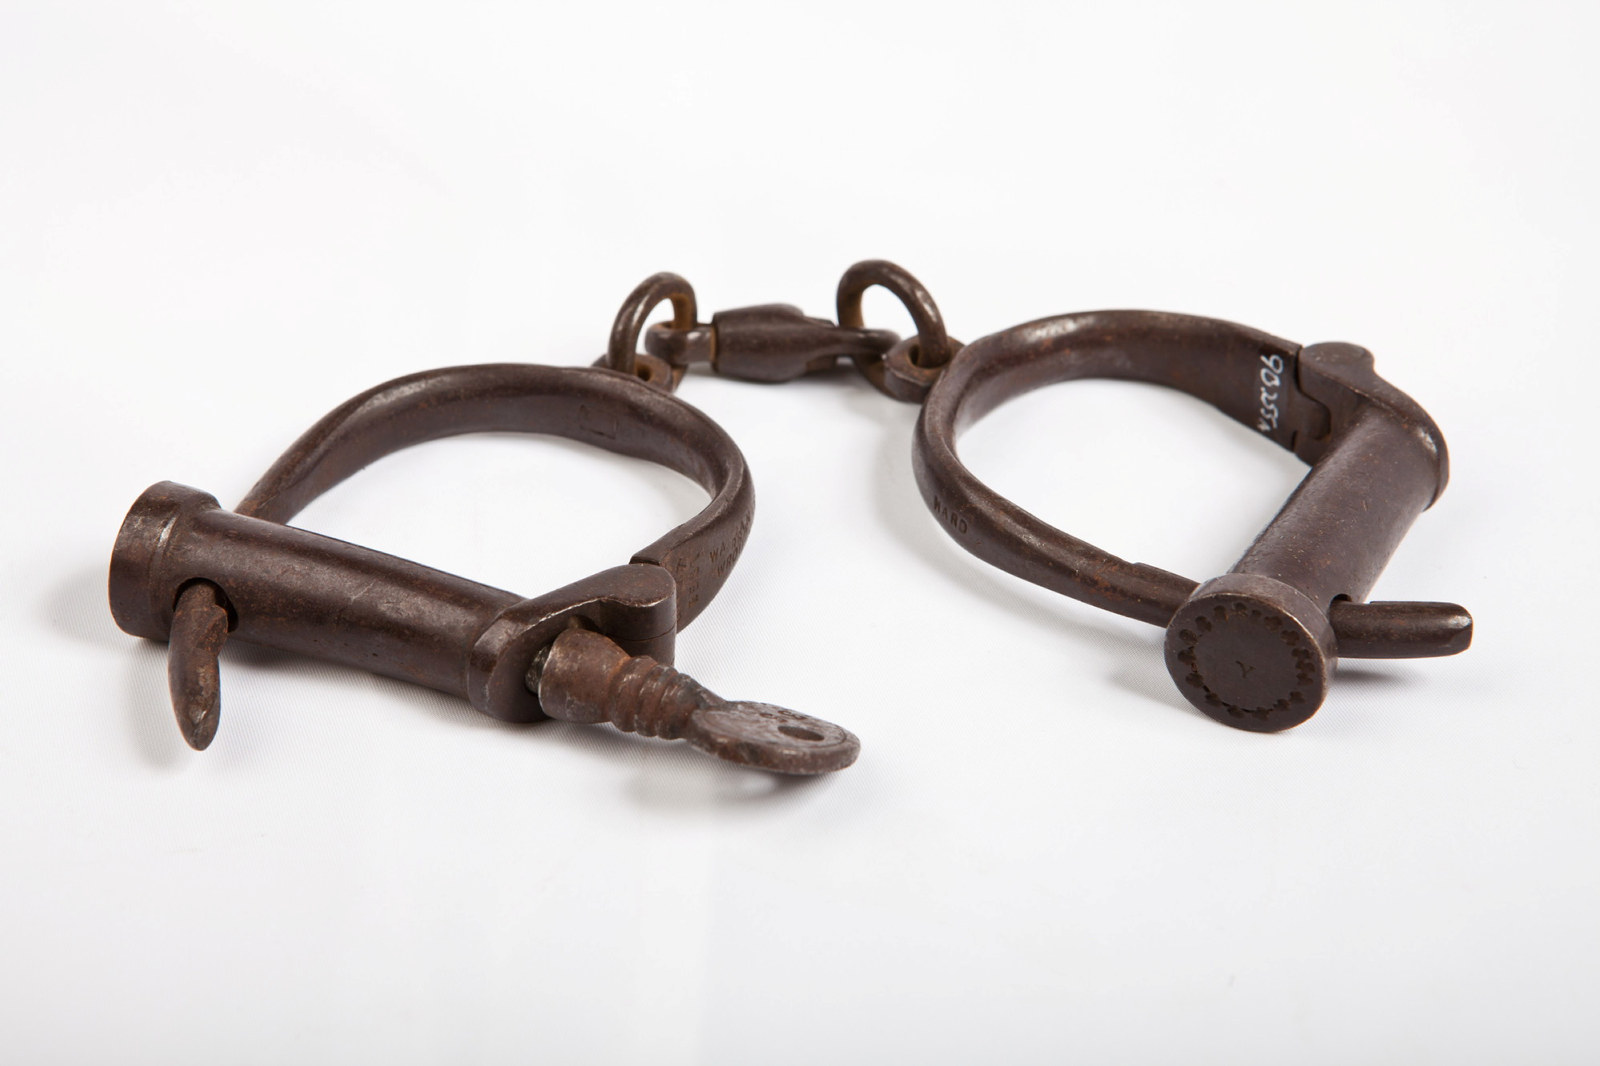 handcuffs used by police